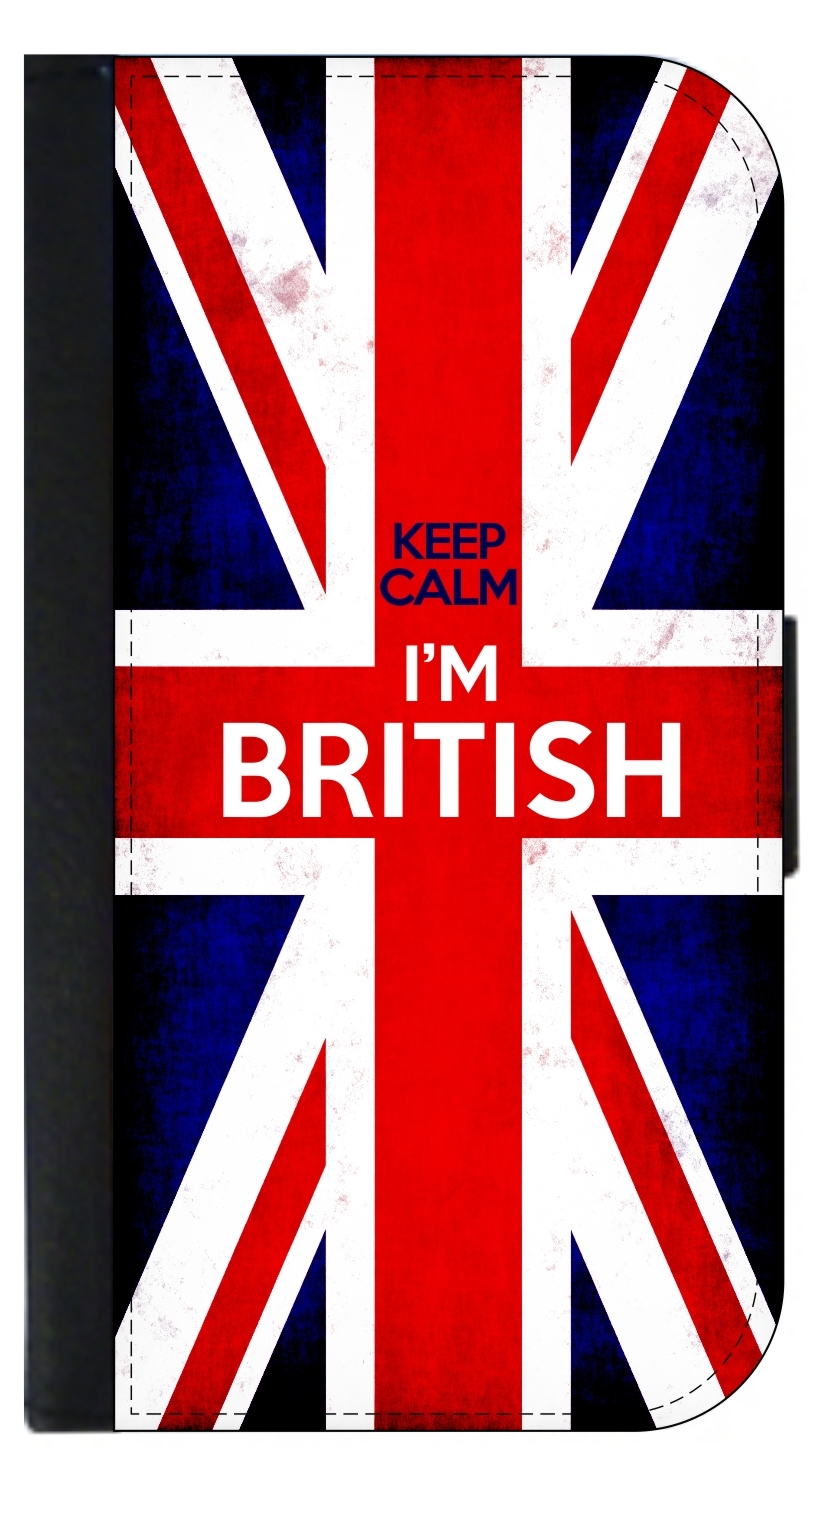 Flag Great Britian - Keep Calm I'm British Flag - Galaxy s10 Case - s10 Wallet Case - Galaxy s10 Case Leather Impression - Galaxy s10 Case Black - s10 Case Card Holder - image 1 of 3